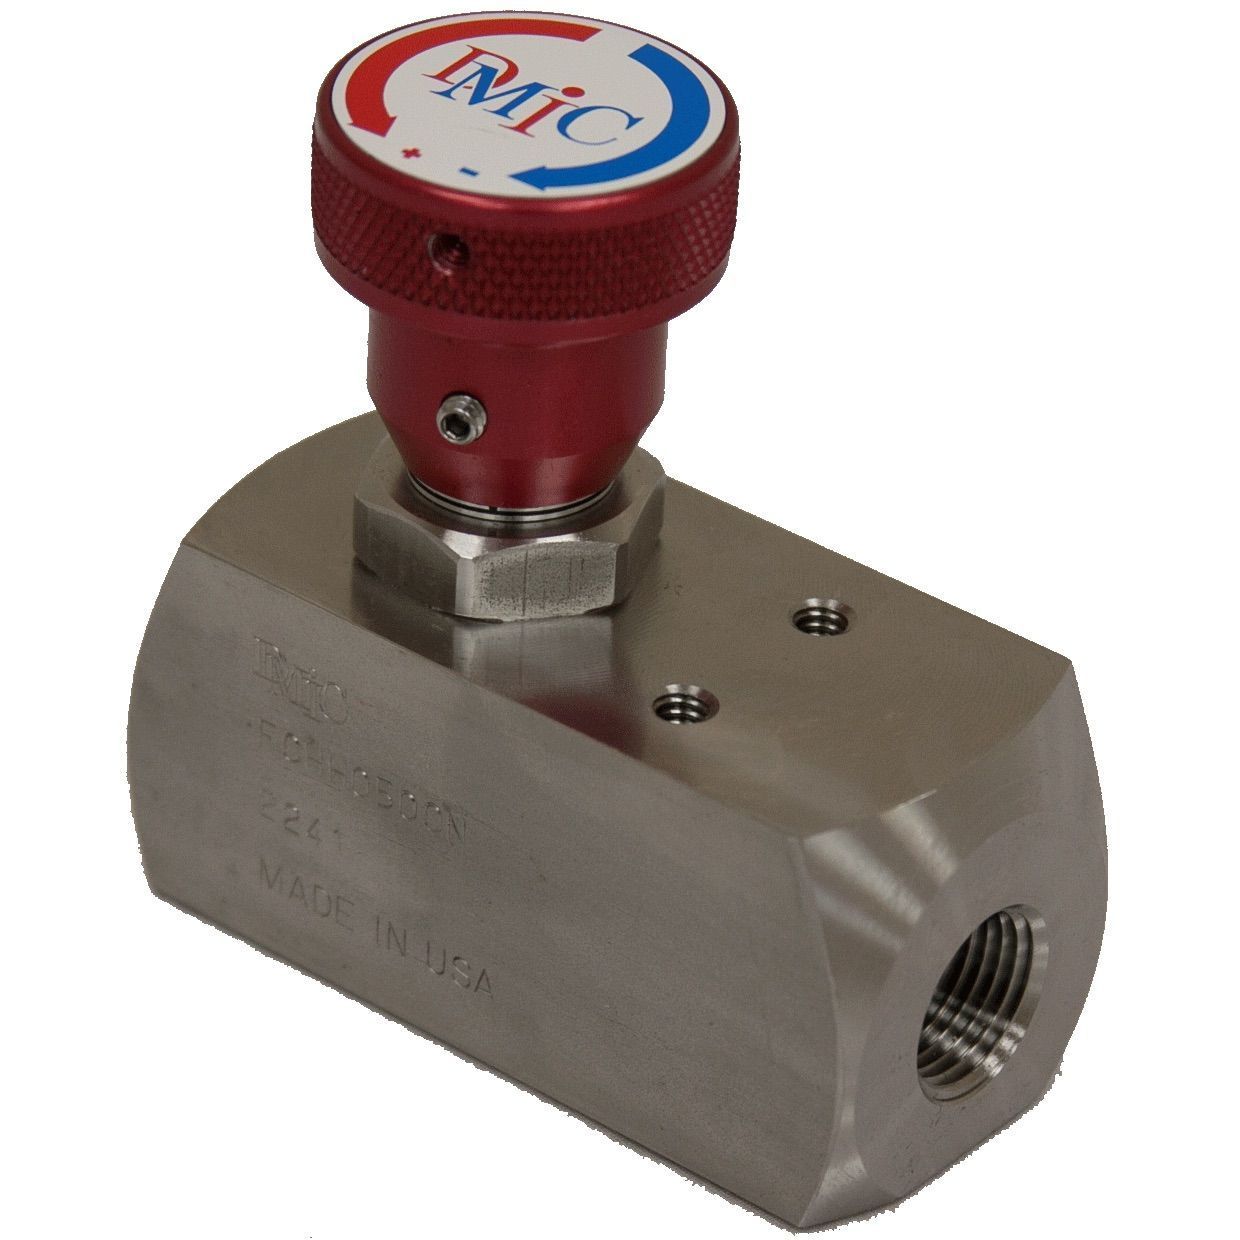 FCHH-1000S-2221 : DMIC Flow Control, Unidirectional, with Integrated Check, #16 SAE (1"), 316SS, 10000psi